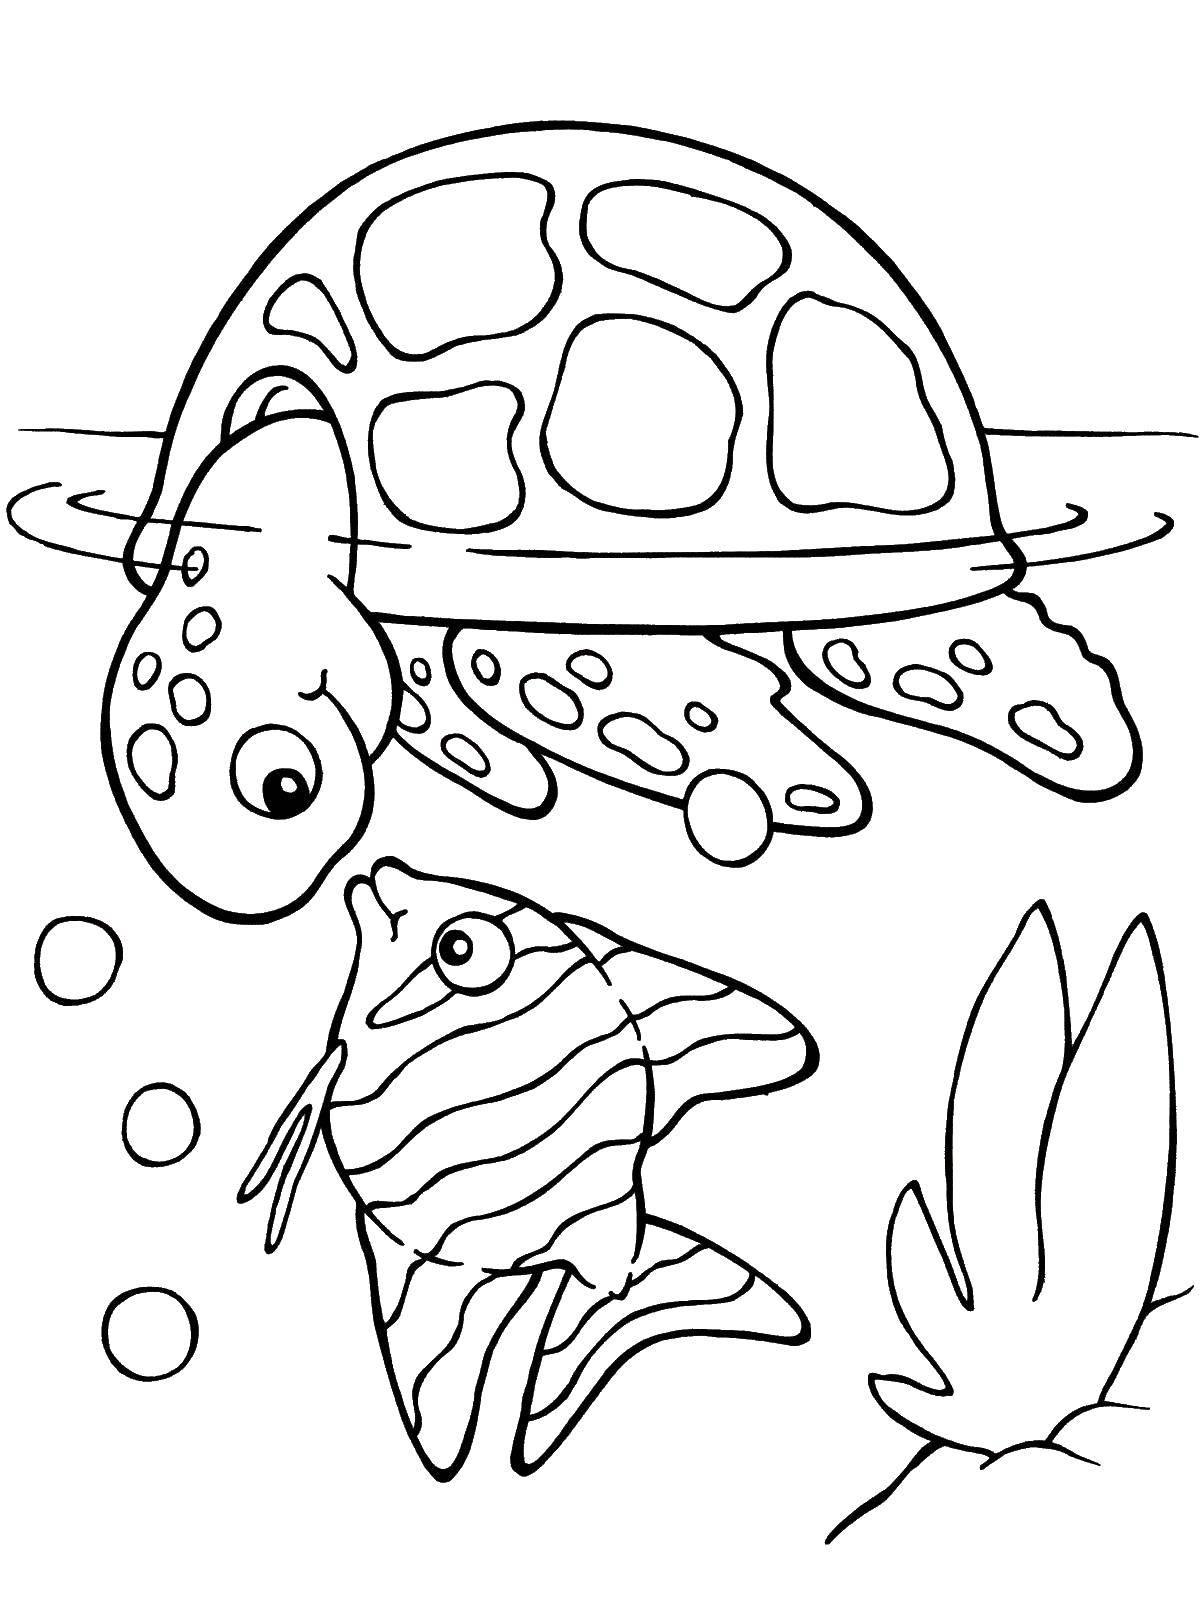 Coloring Turtle with fish. Category coloring. Tags:  turtle.